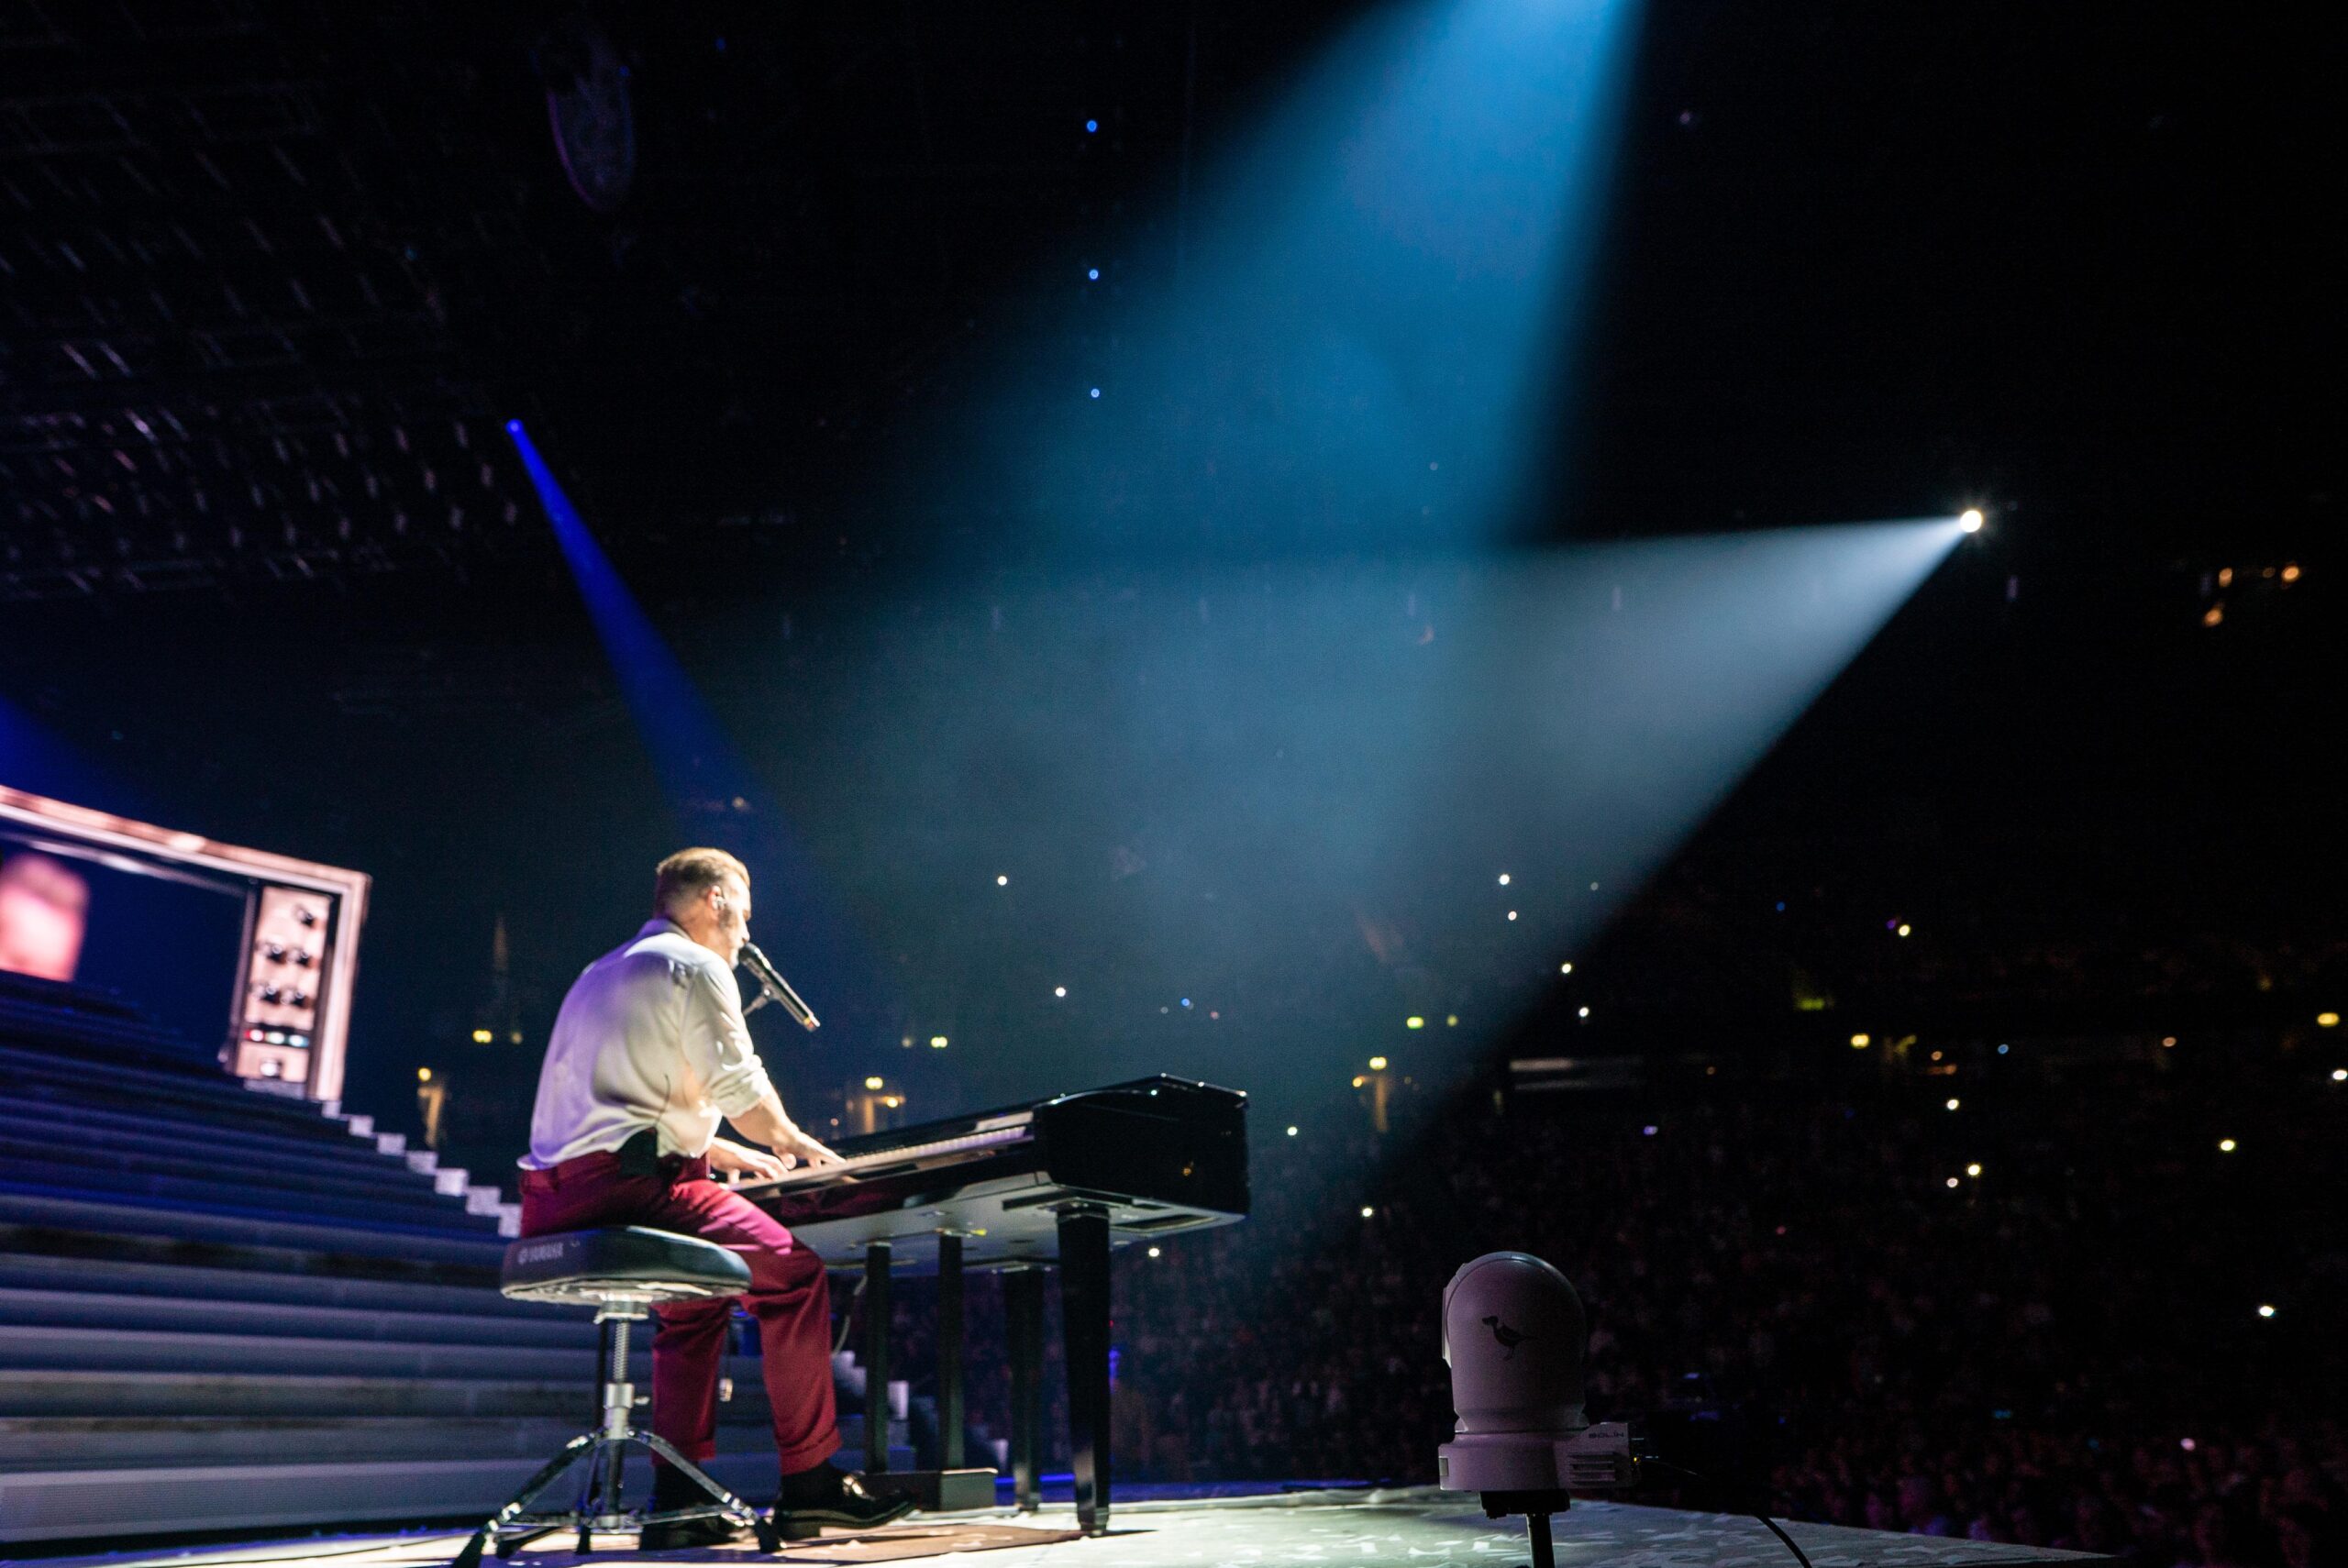 Gary Barlow taking to the piano in Manchester. Credit: RHM Productions